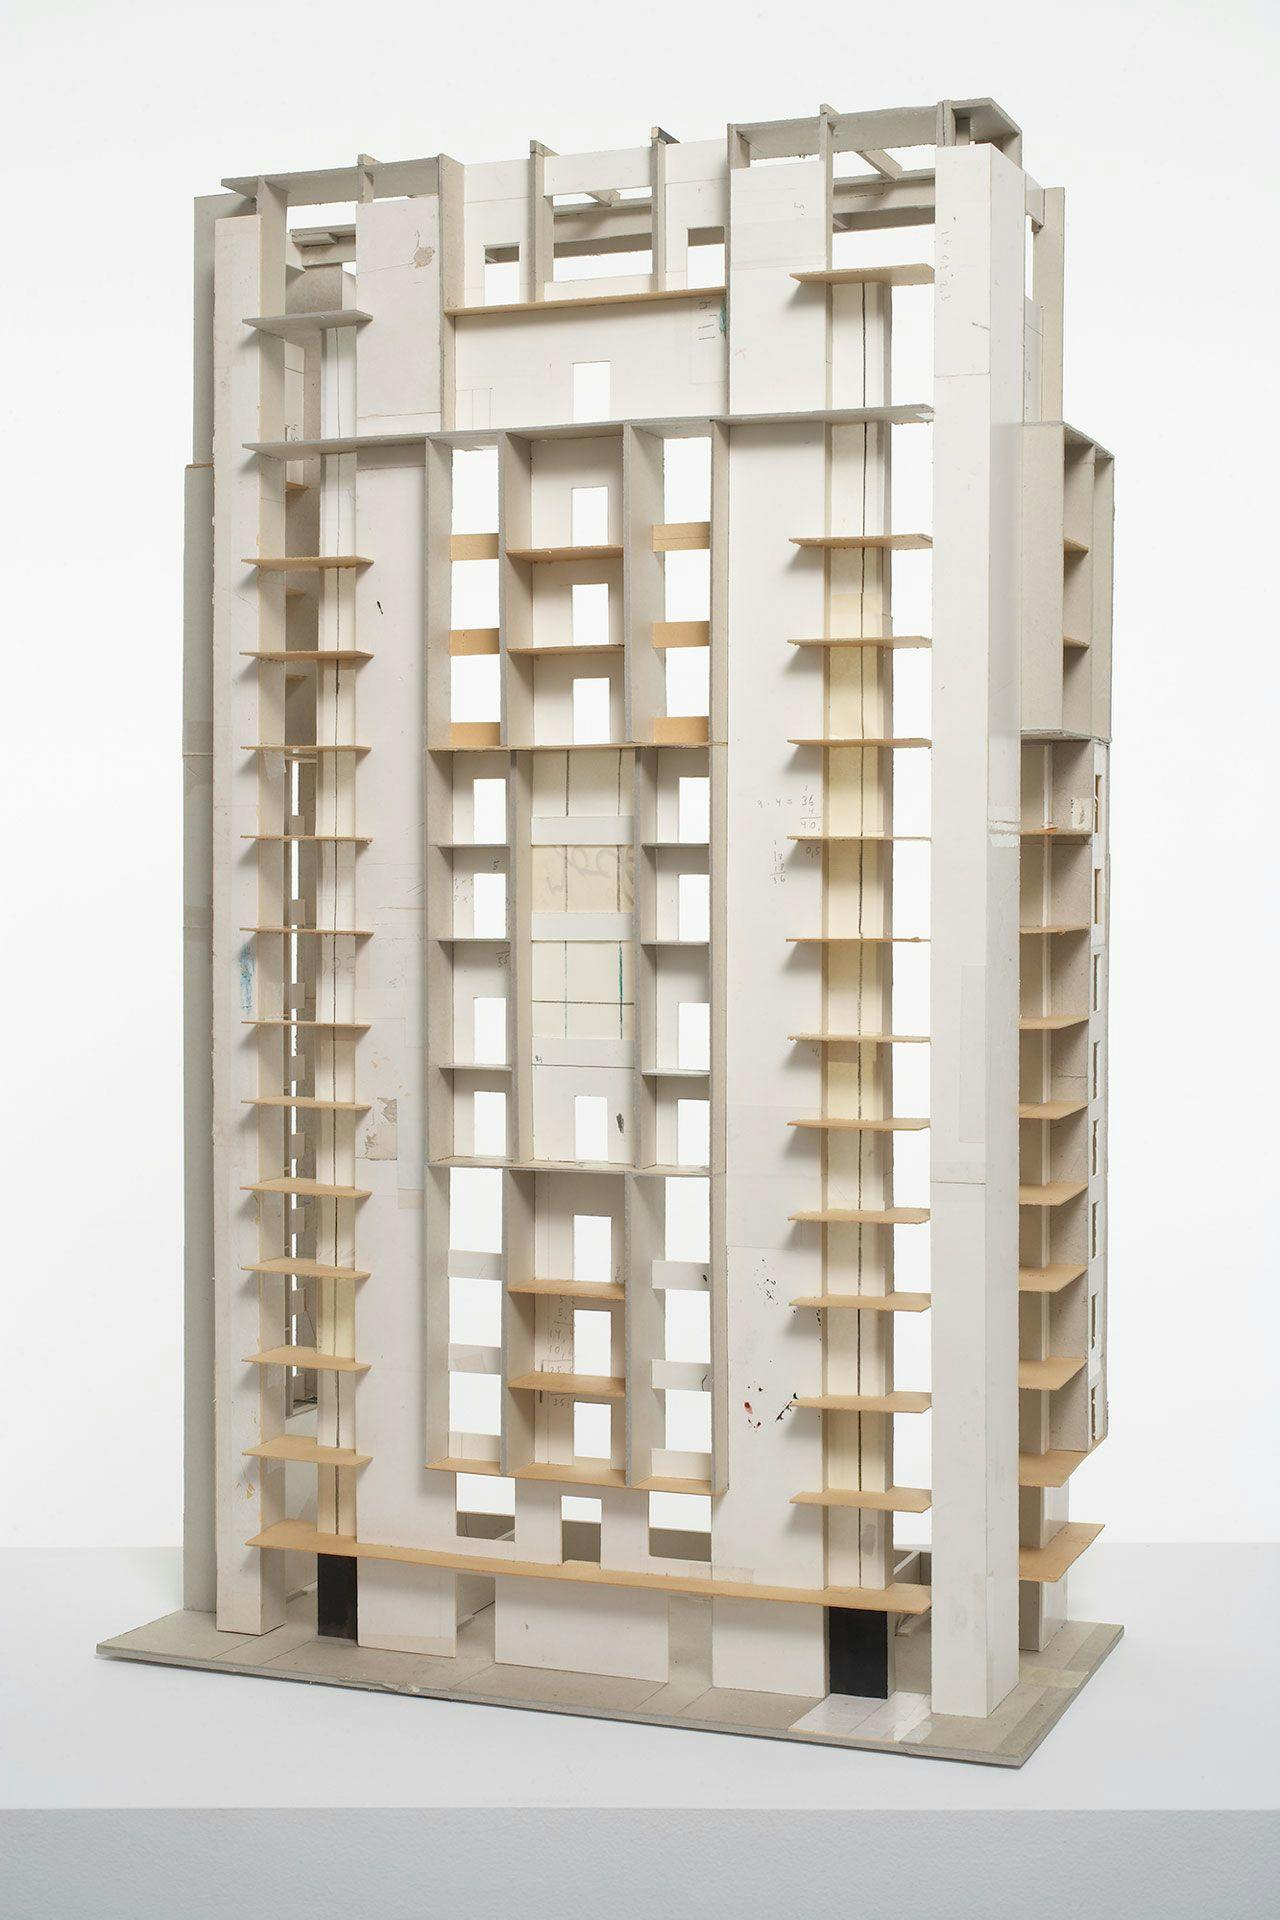 A sculpture by Jockum Nordstr√∂m, titled House-Recording, dated 2006.